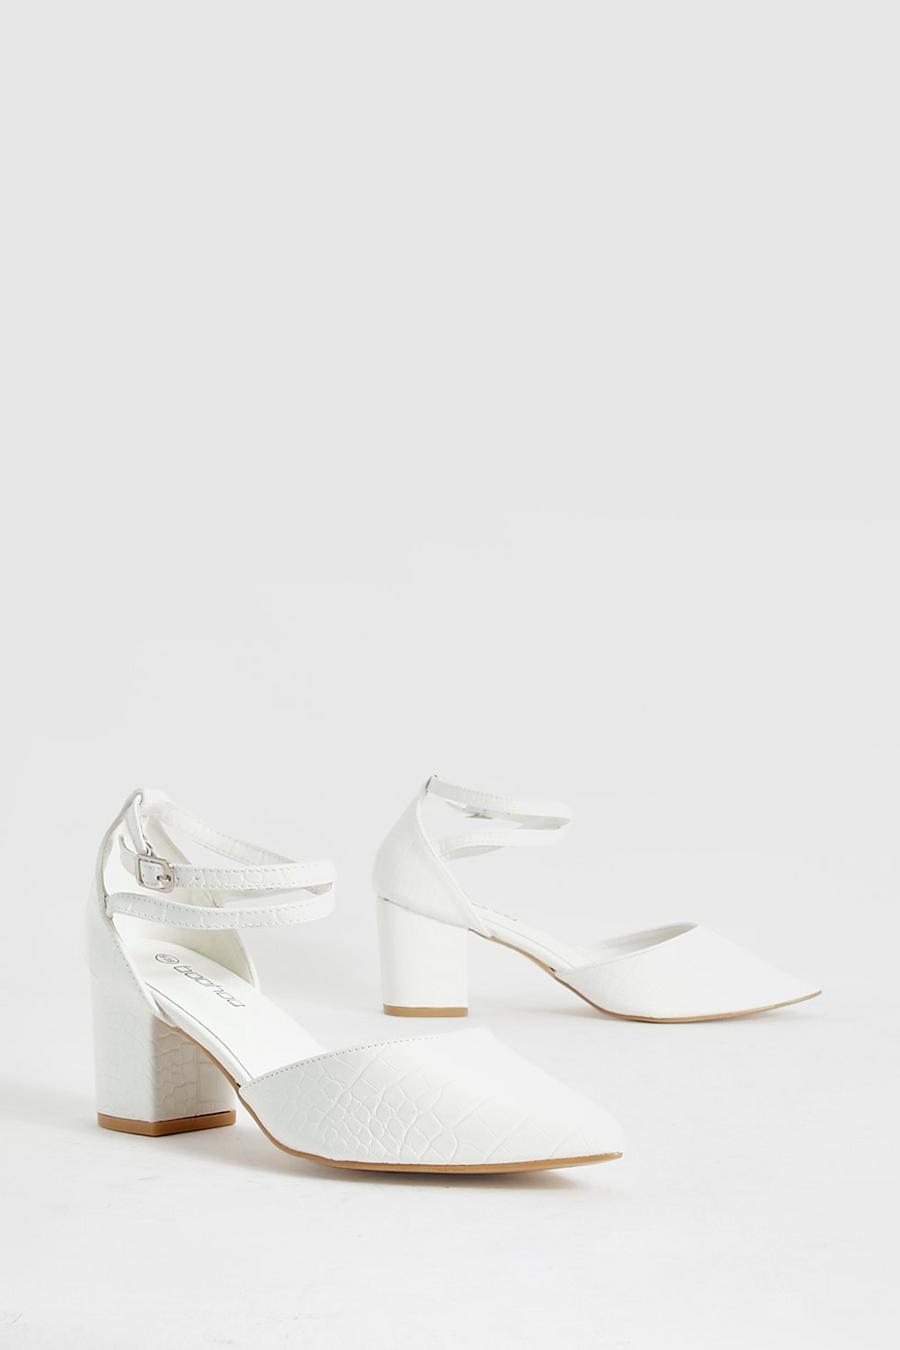 White Croc Heeled Pointed Flats